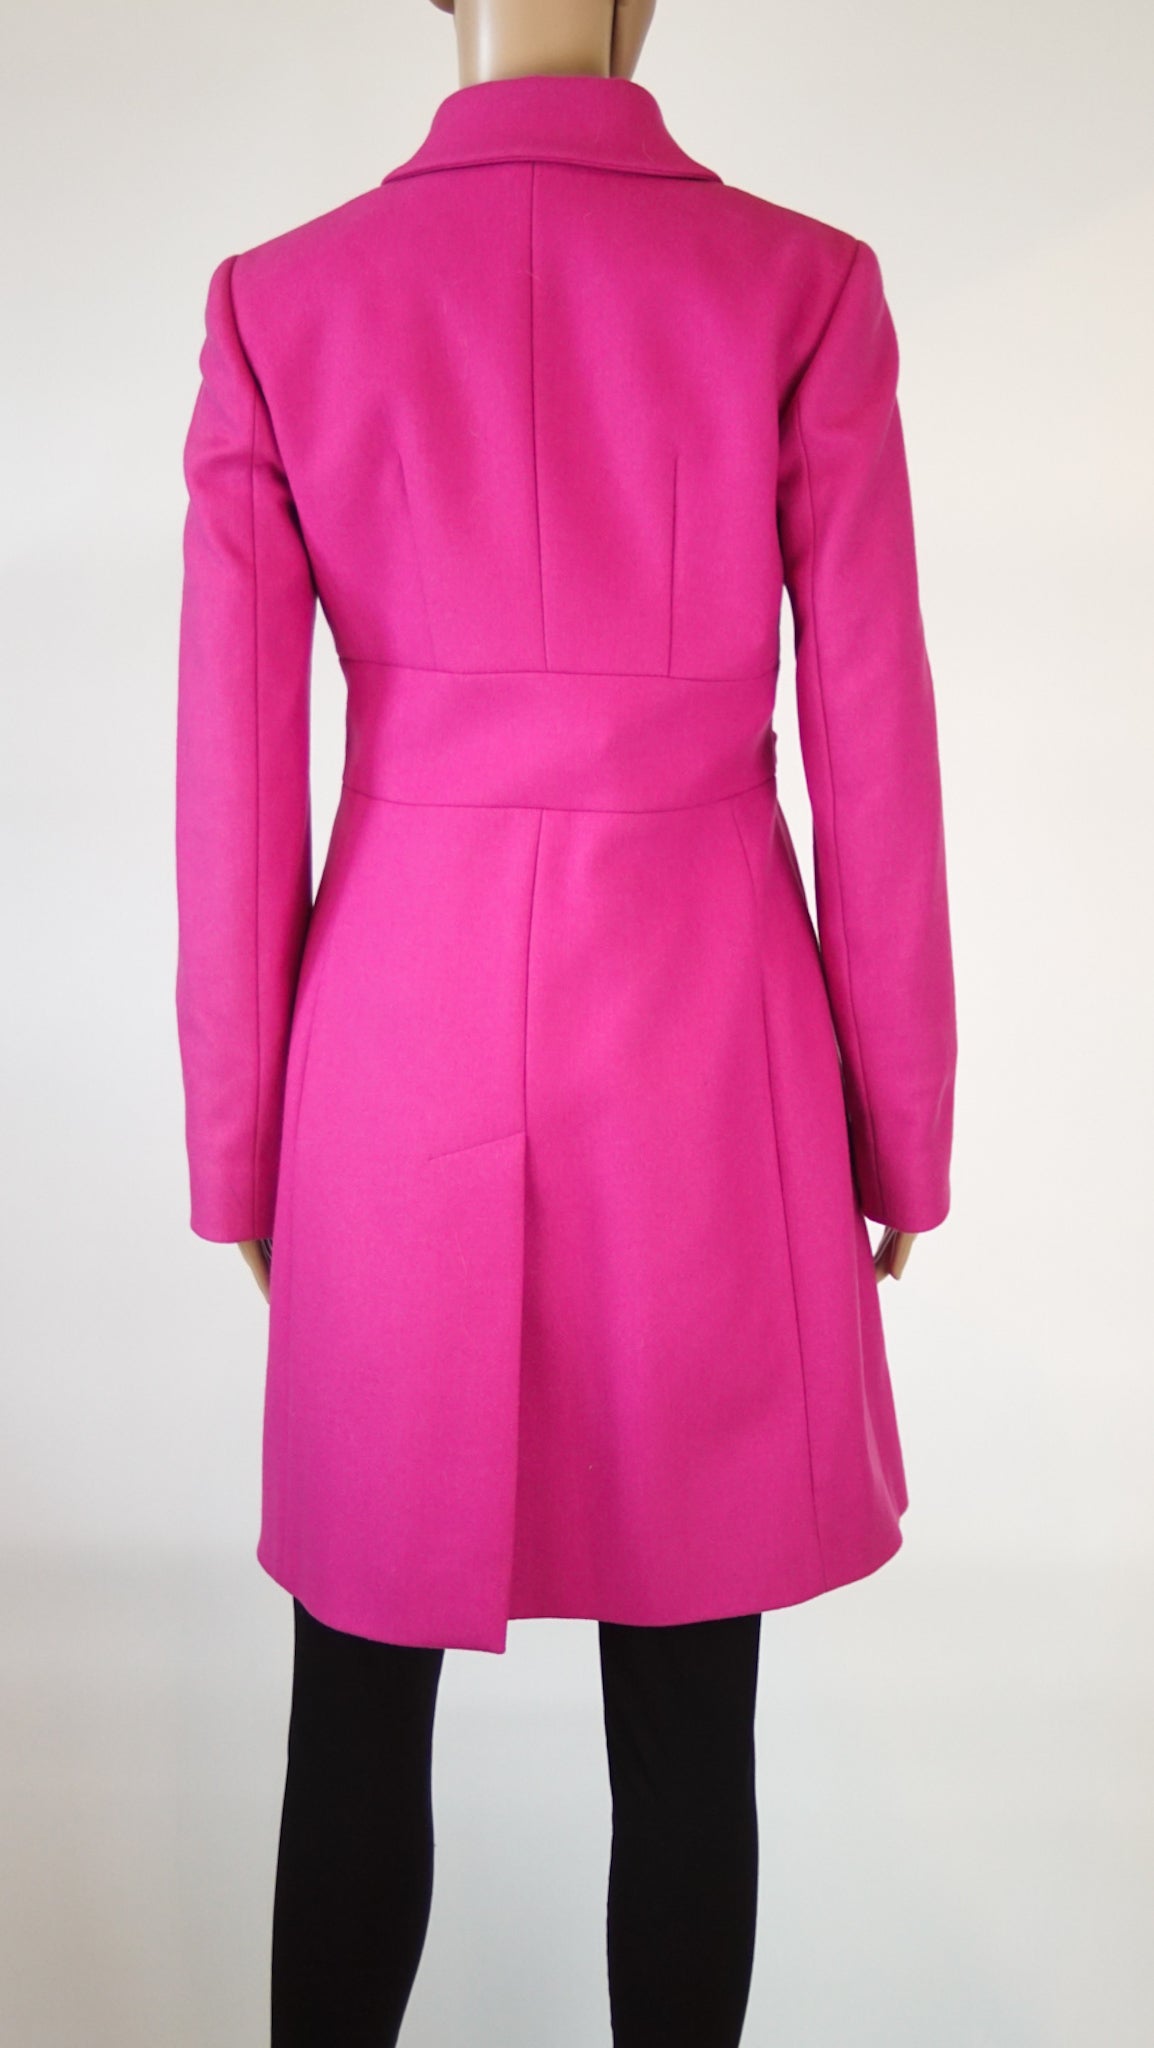 Red Valentino pink coat in size 2